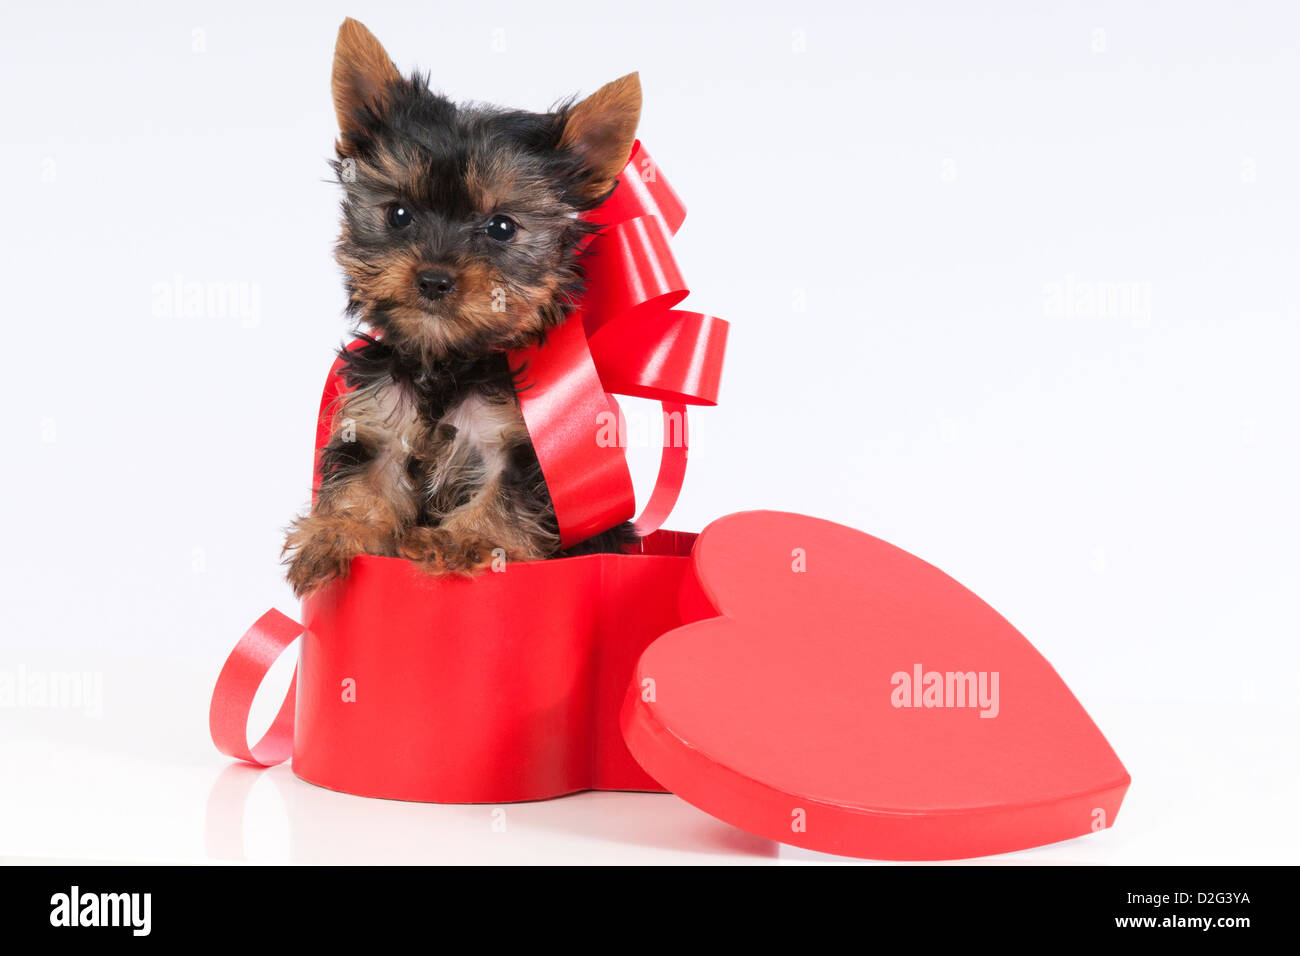 Cute yorkie puppy in a heart shaped gift box. Stock Photo